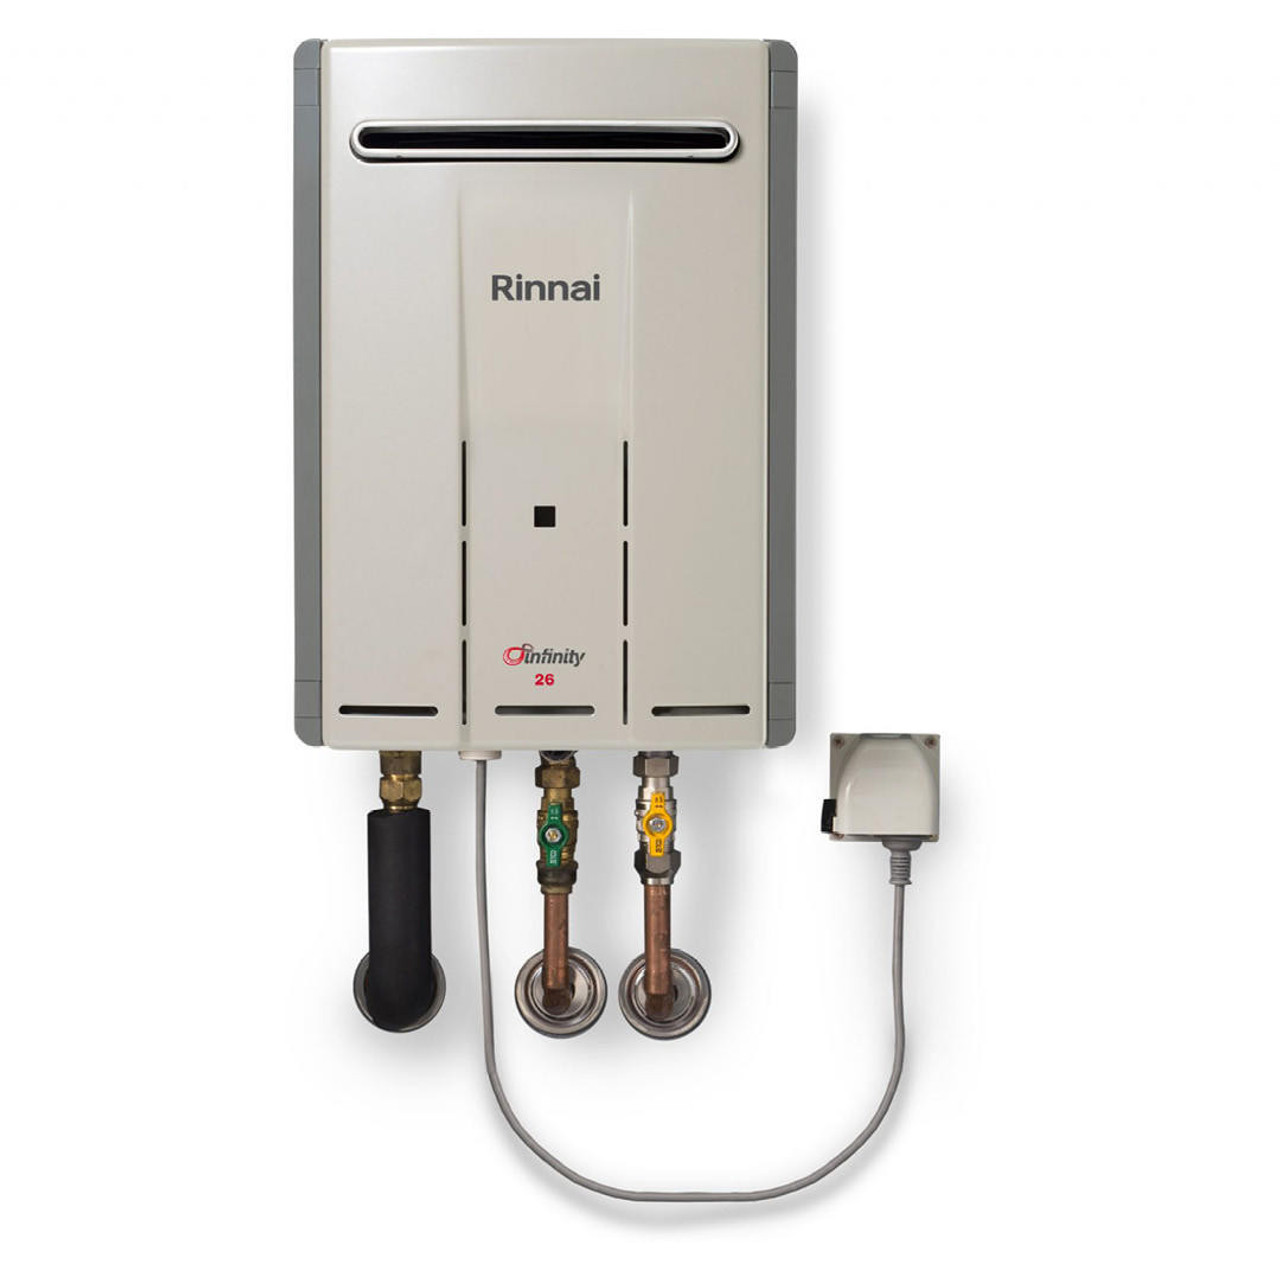 Rinnai Infinity 26 Touch Continuous Flow Gas Hot Water System Champagne Pearl